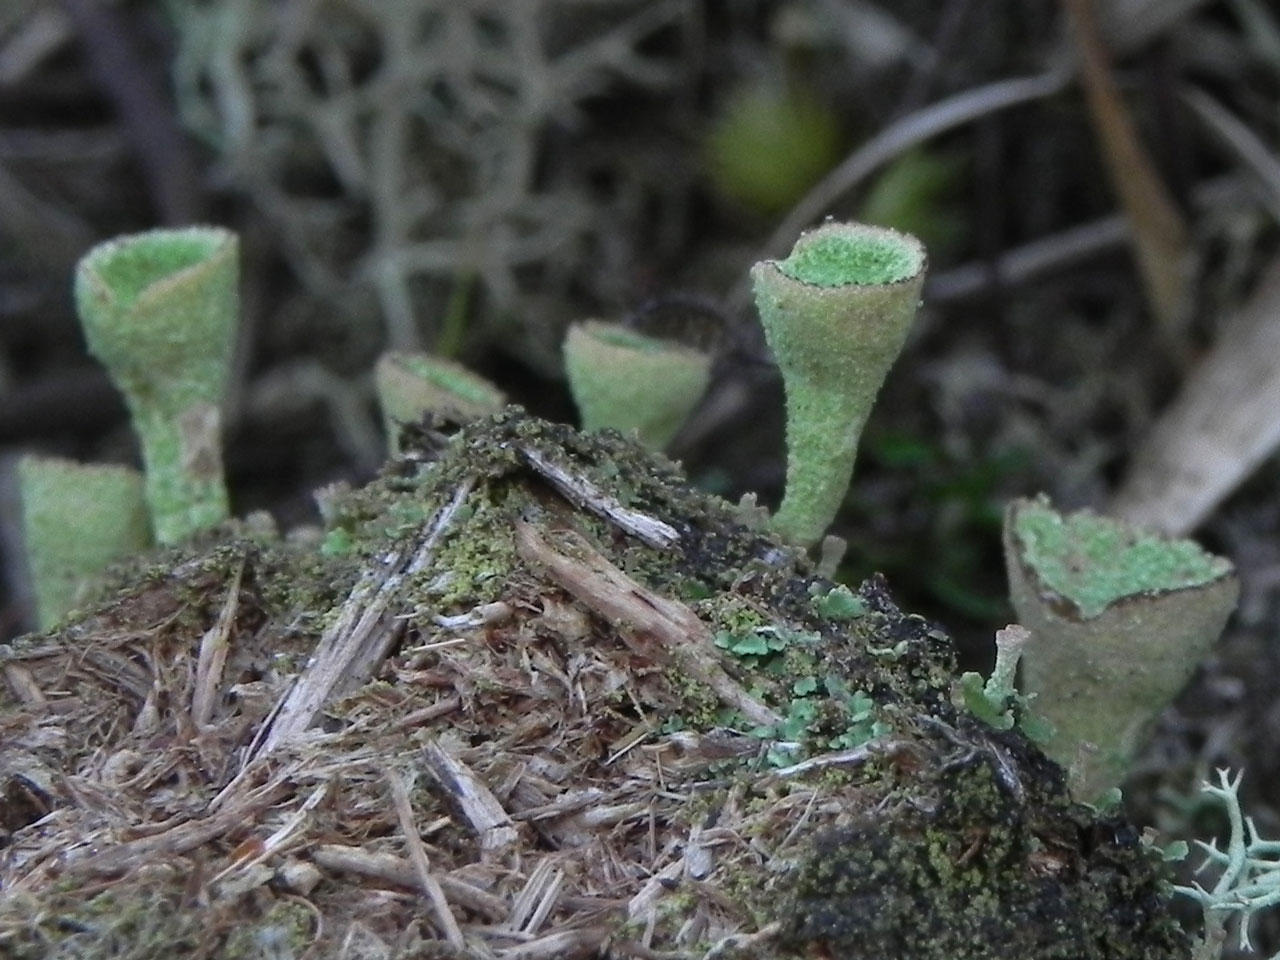 Cladonia chlorophaea s. str., New Forest